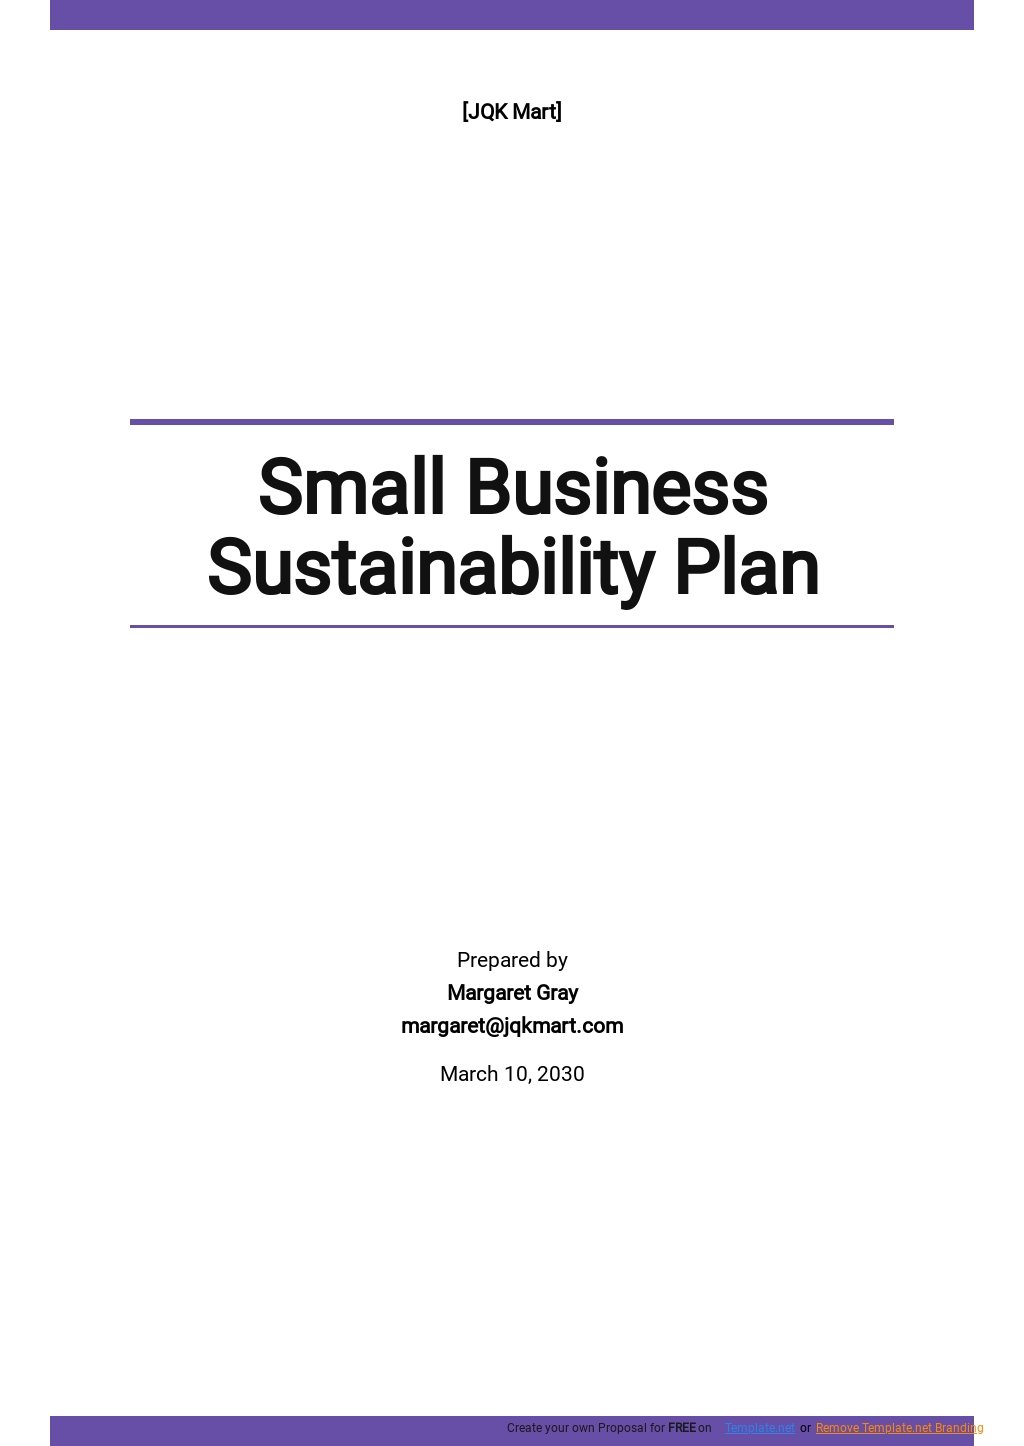 Sustainability Plan Templates Documents, Design, Free, Download